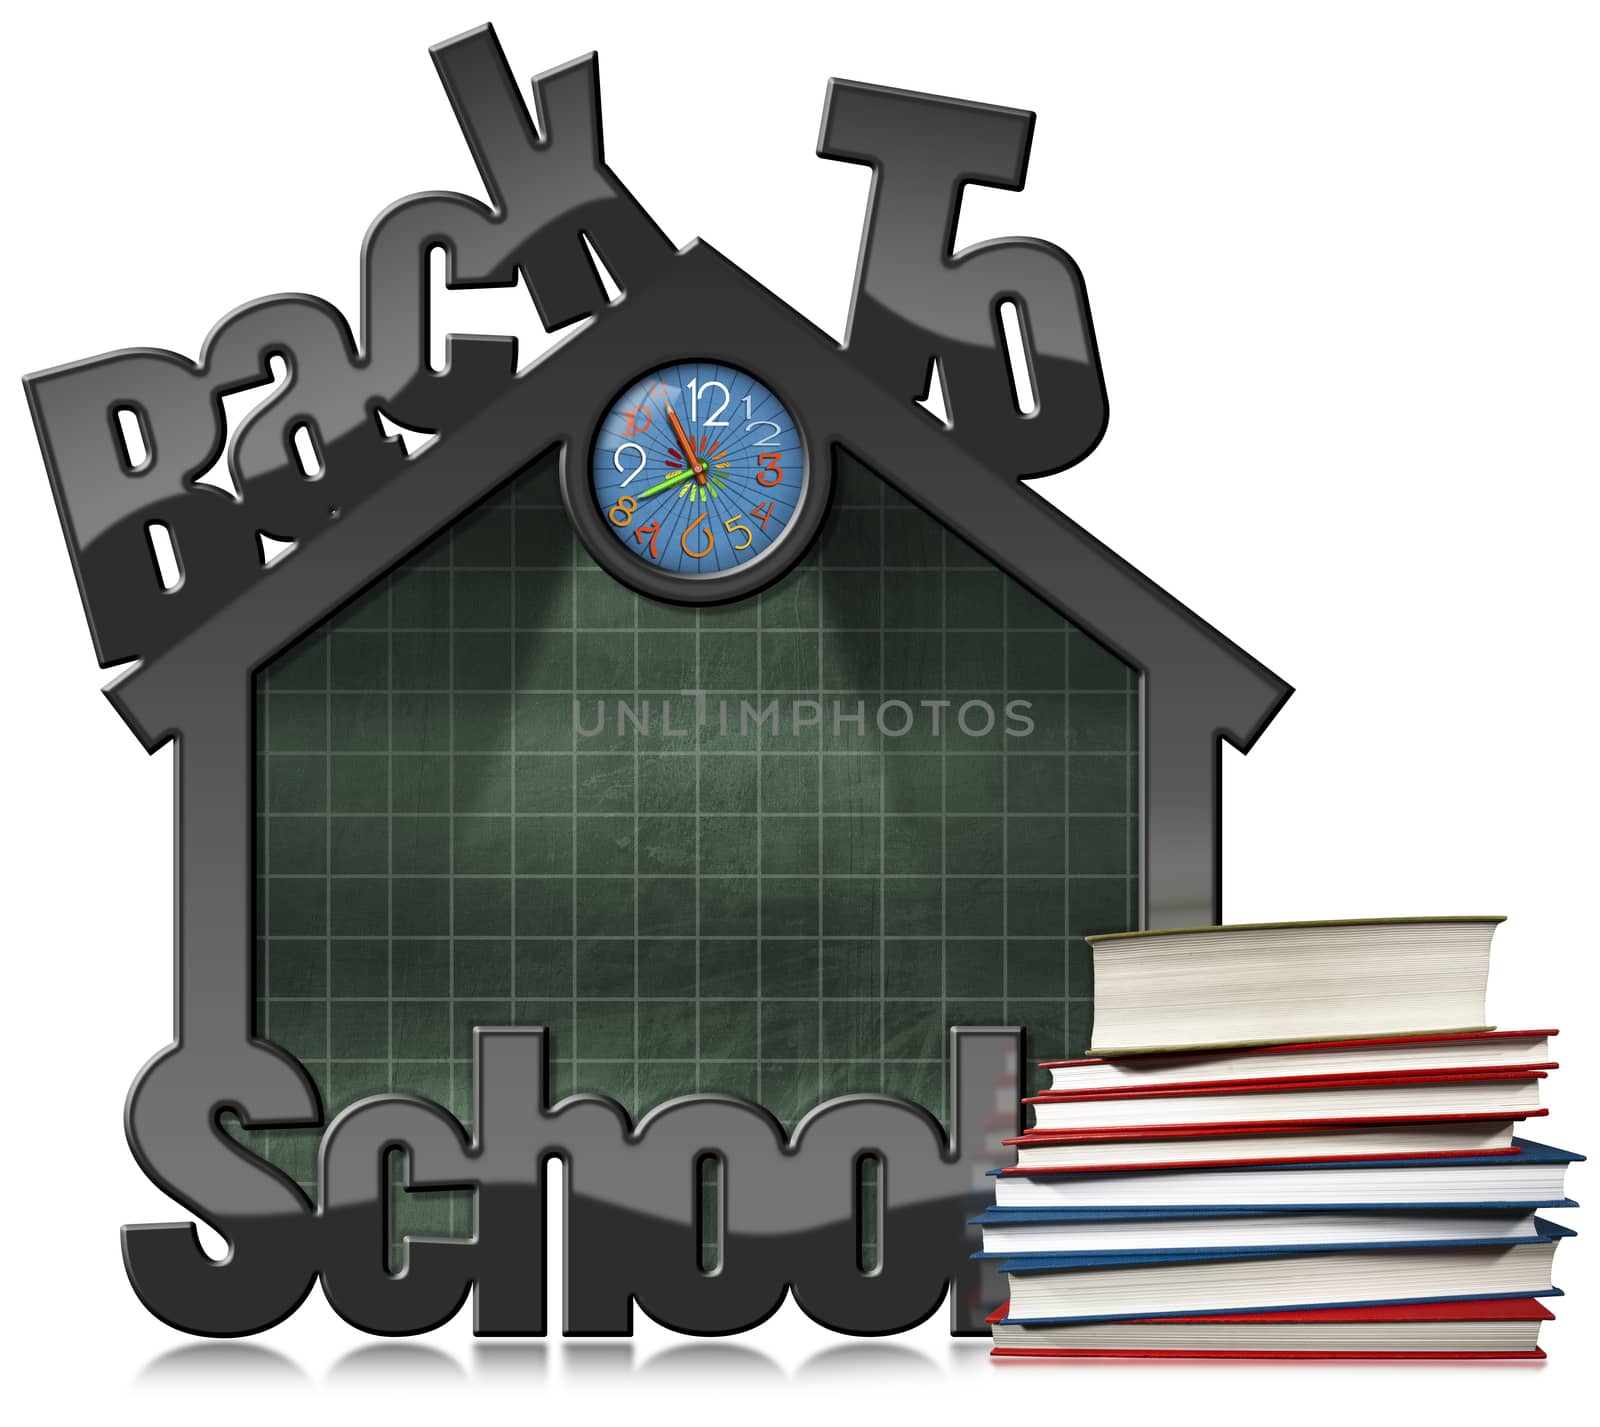 Empty blackboard with frame in the shape of school building with text Back to school, a stack of books and colorful clock